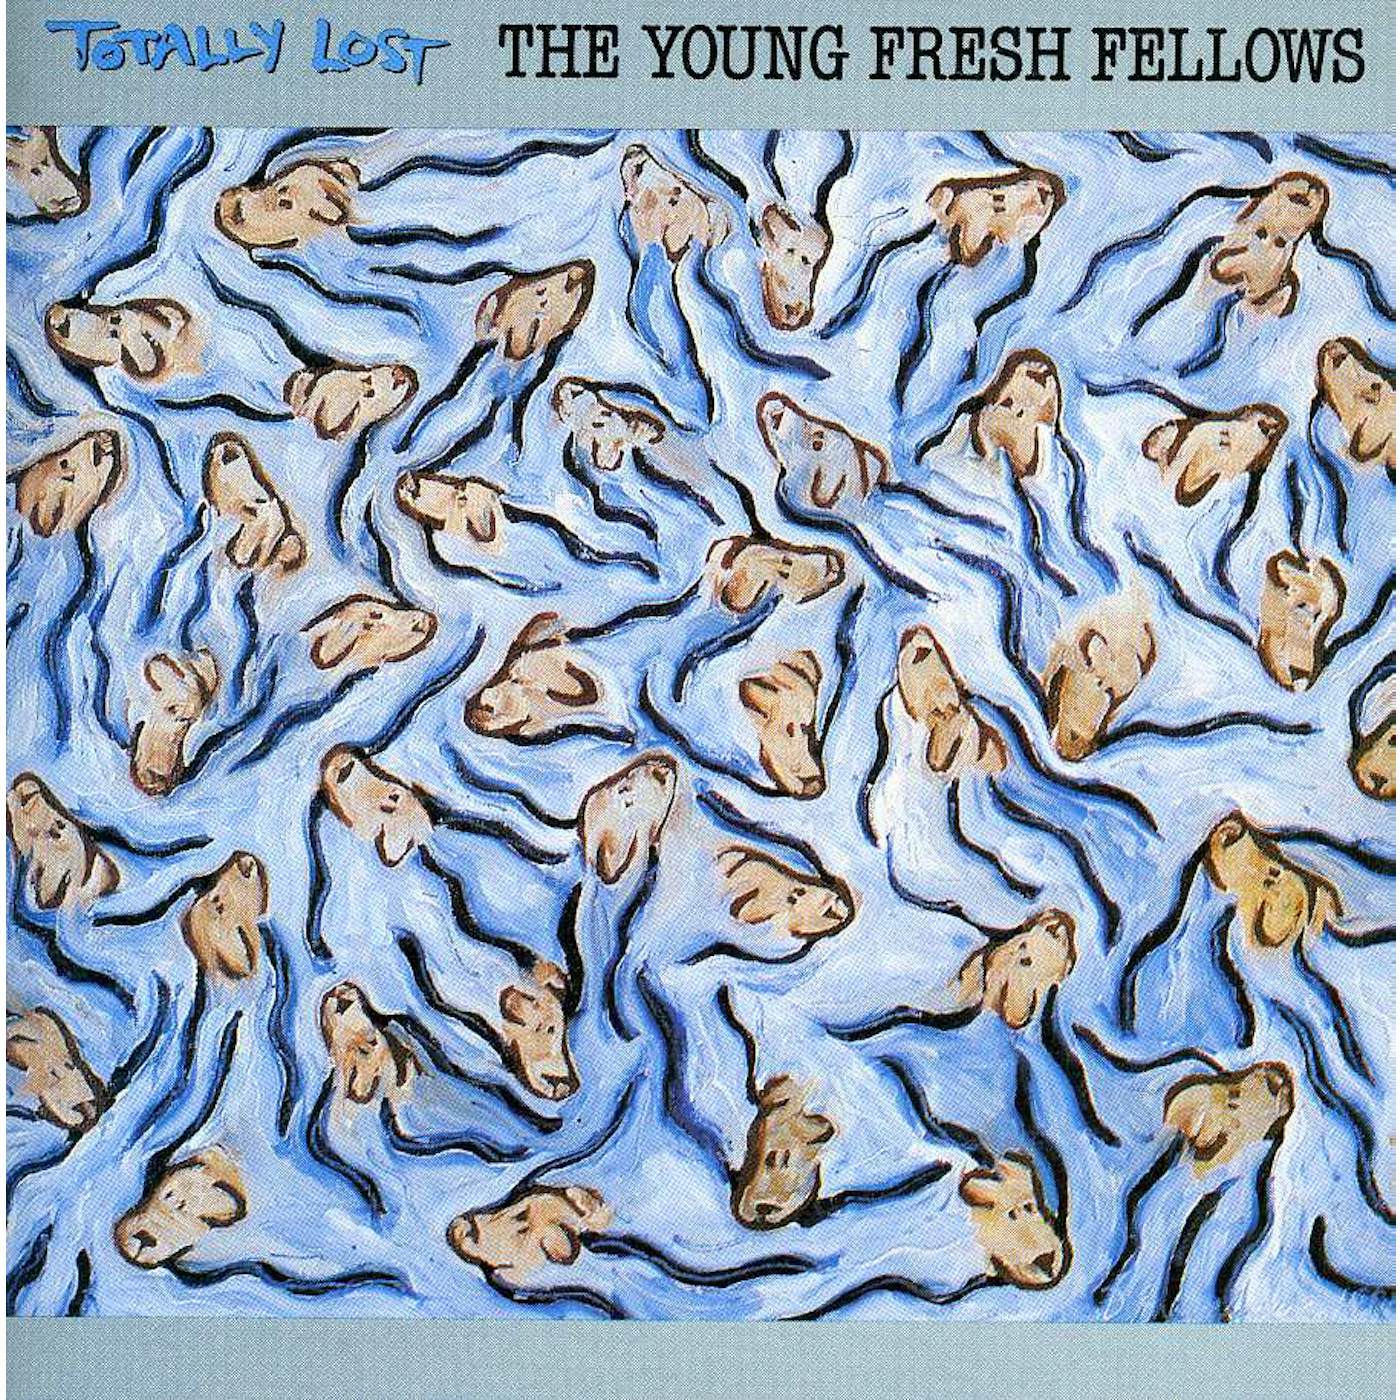 The Young Fresh Fellows TOTALLY LOST CD